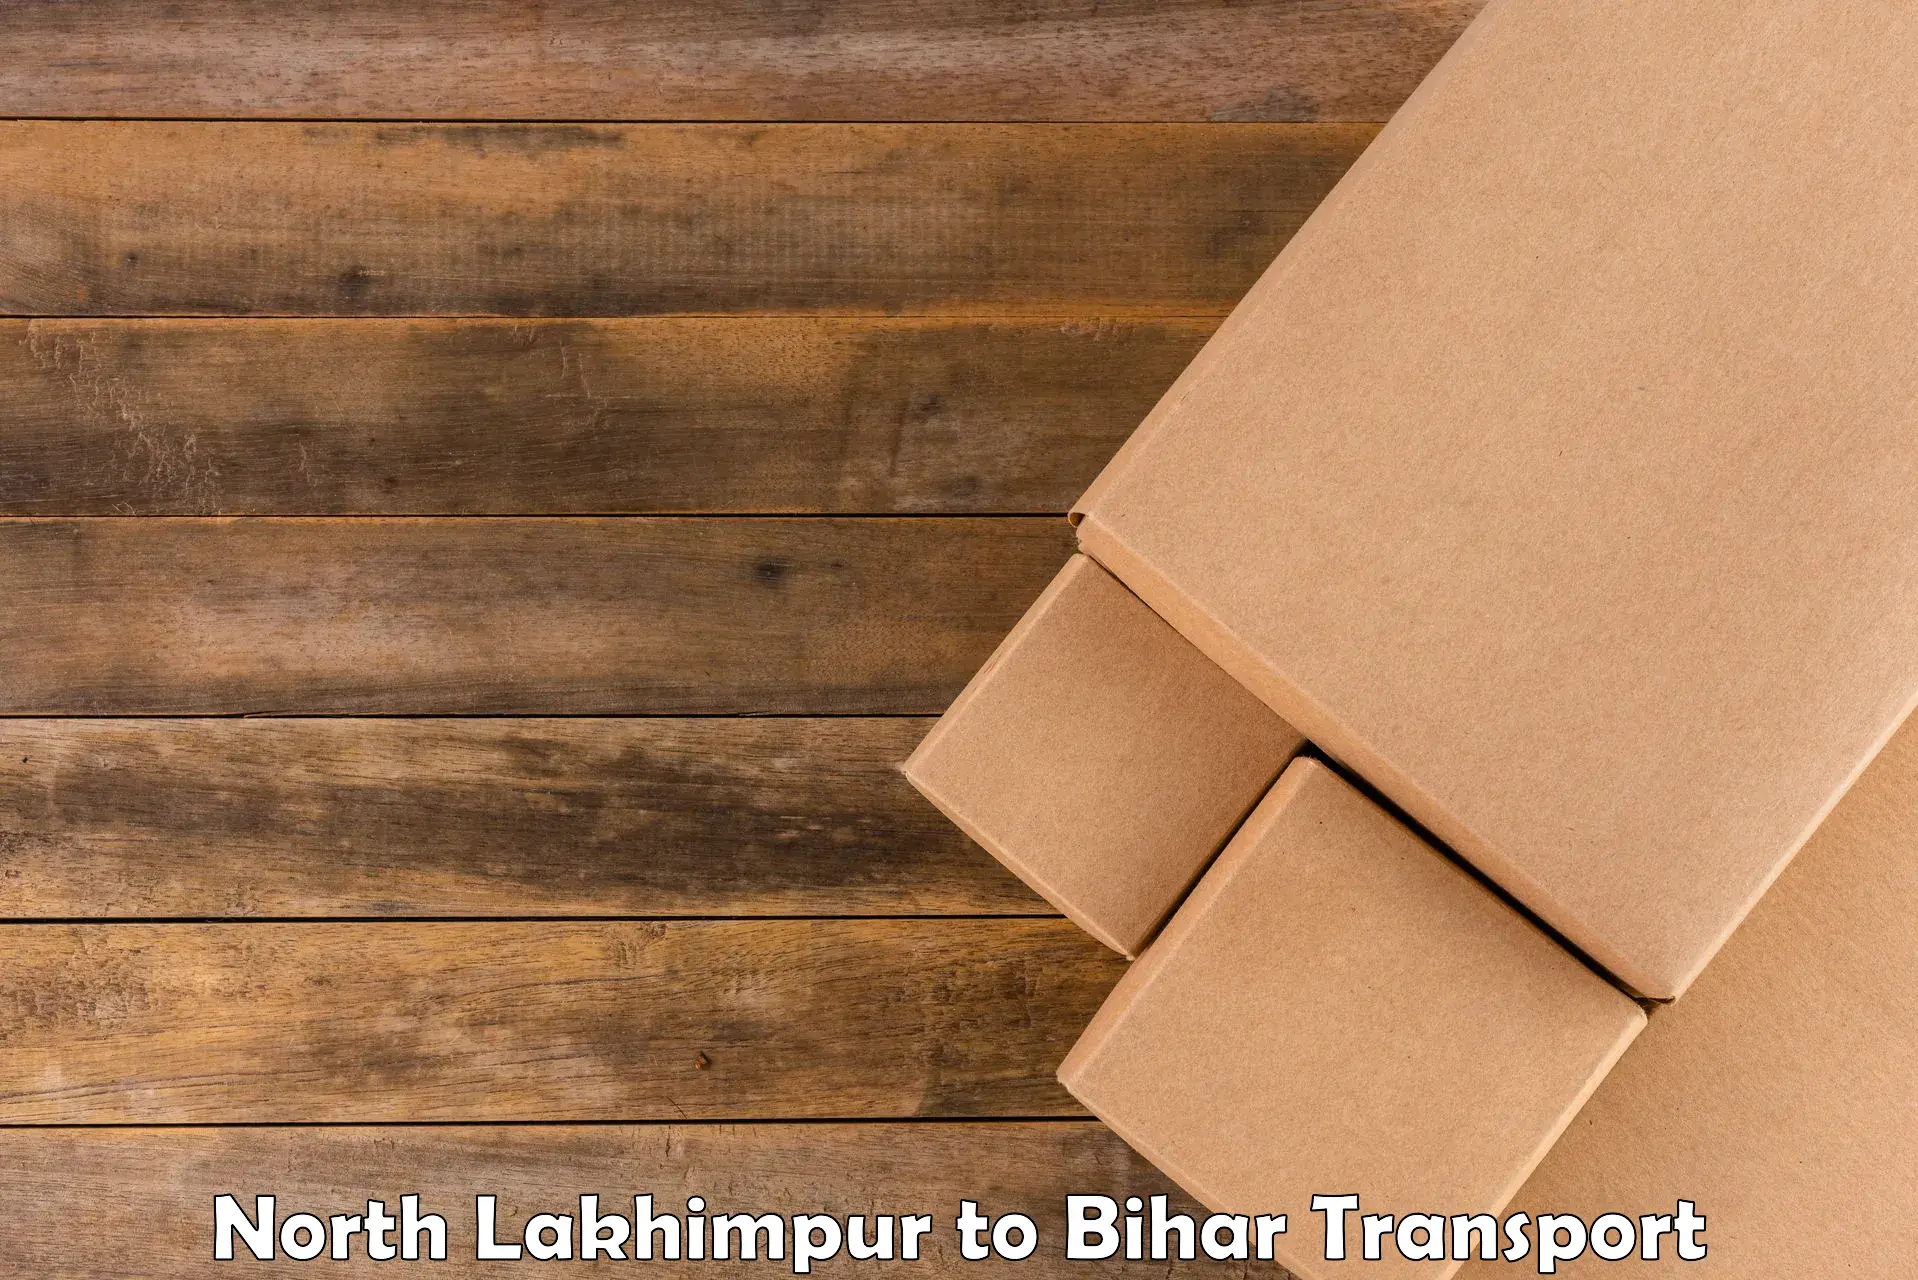 Truck transport companies in India North Lakhimpur to Banmankhi Bazar